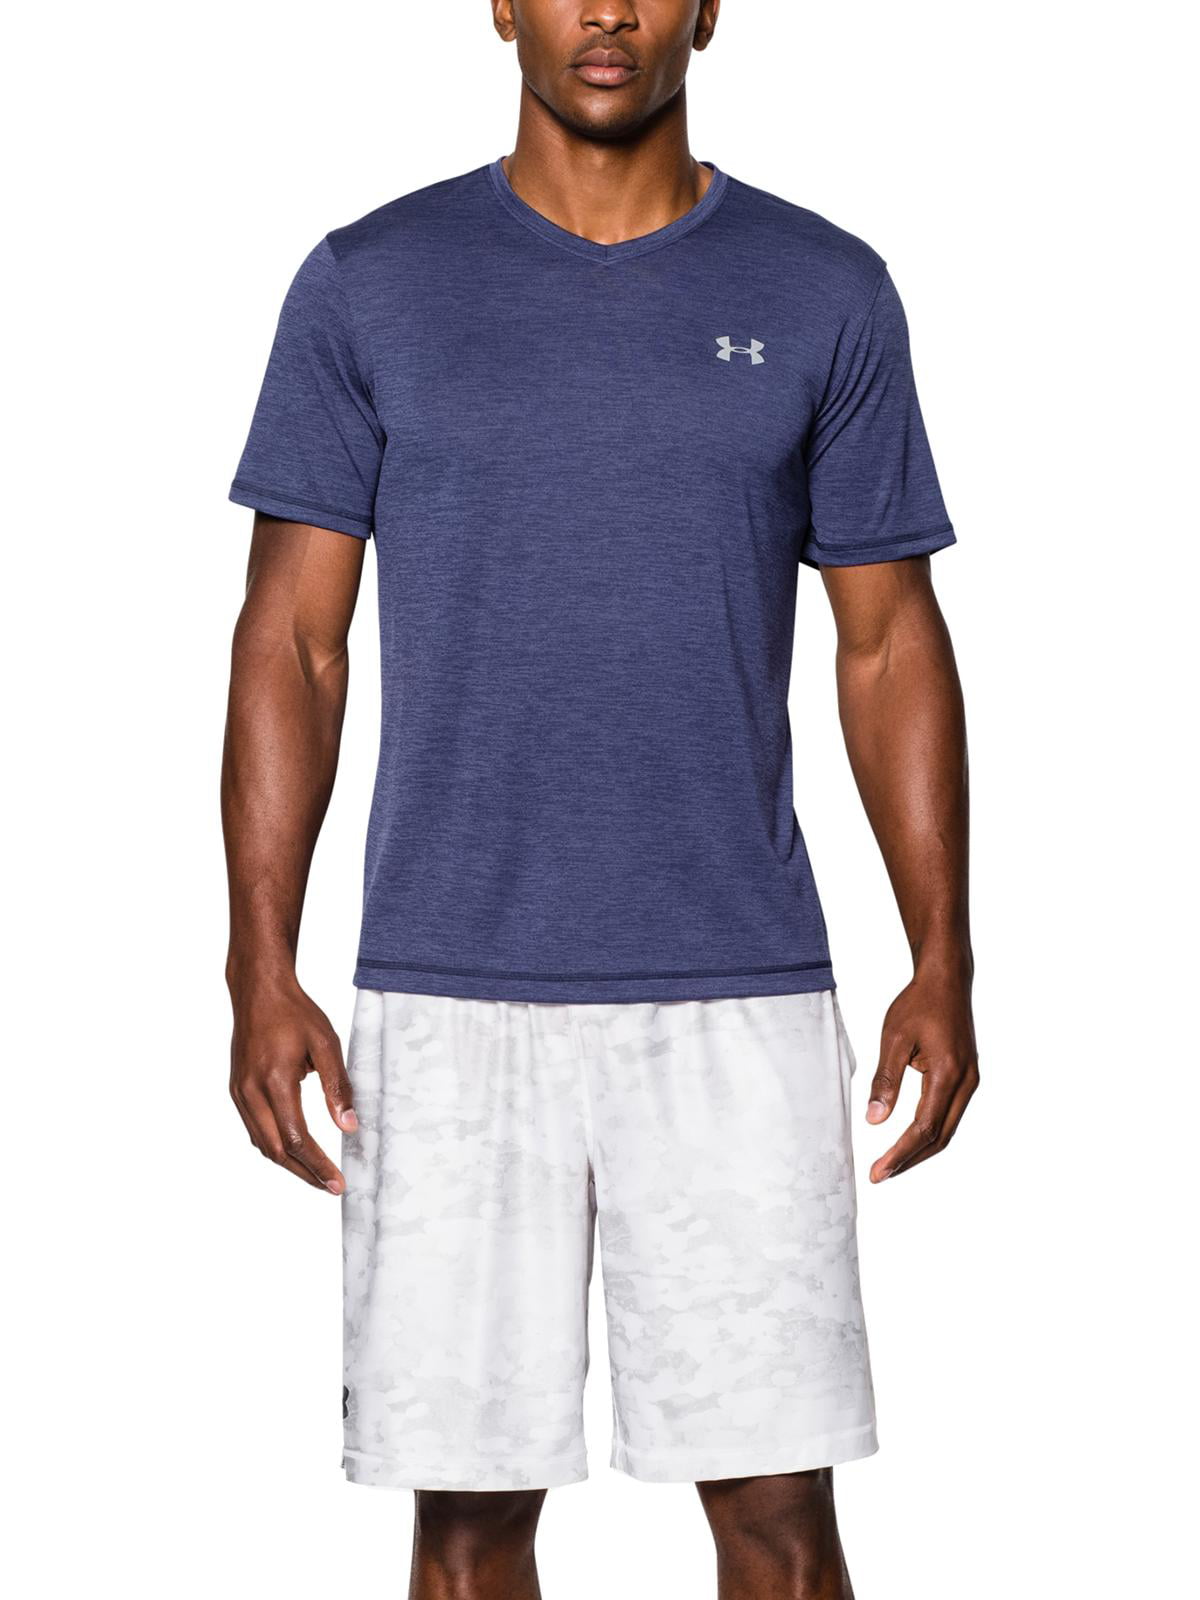 Under Armour Mens Charged Cotton Top Blue Sports Running Gym Breathable 